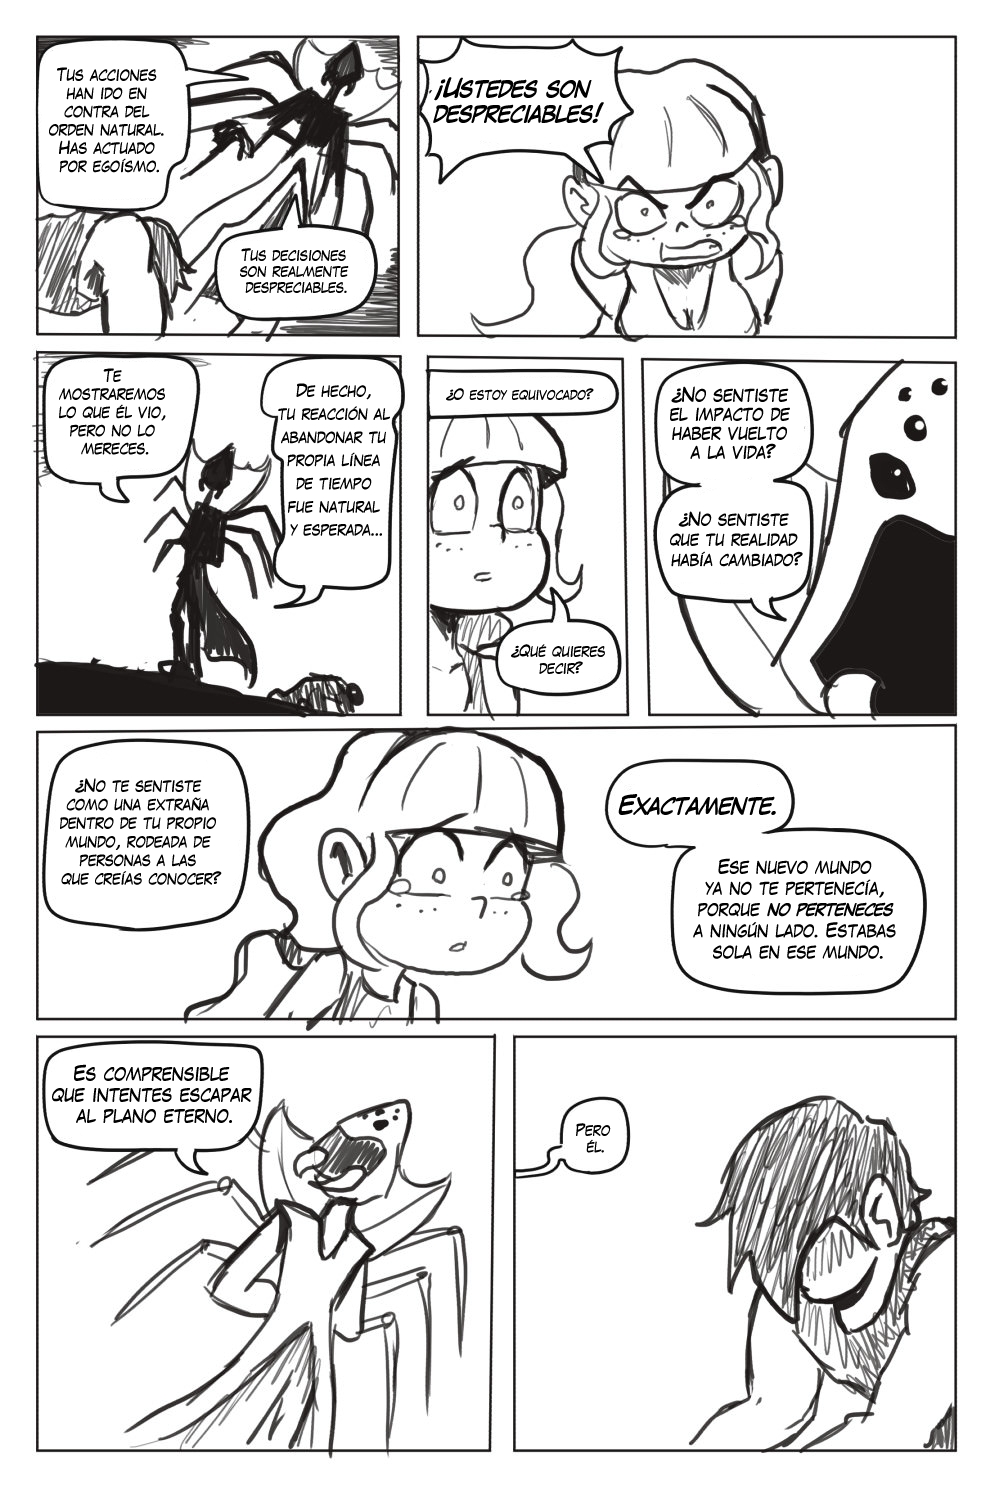 [RaicoSama] If Only (Star vs. the Forces of Evil) [Spanish] [Malorum] 13